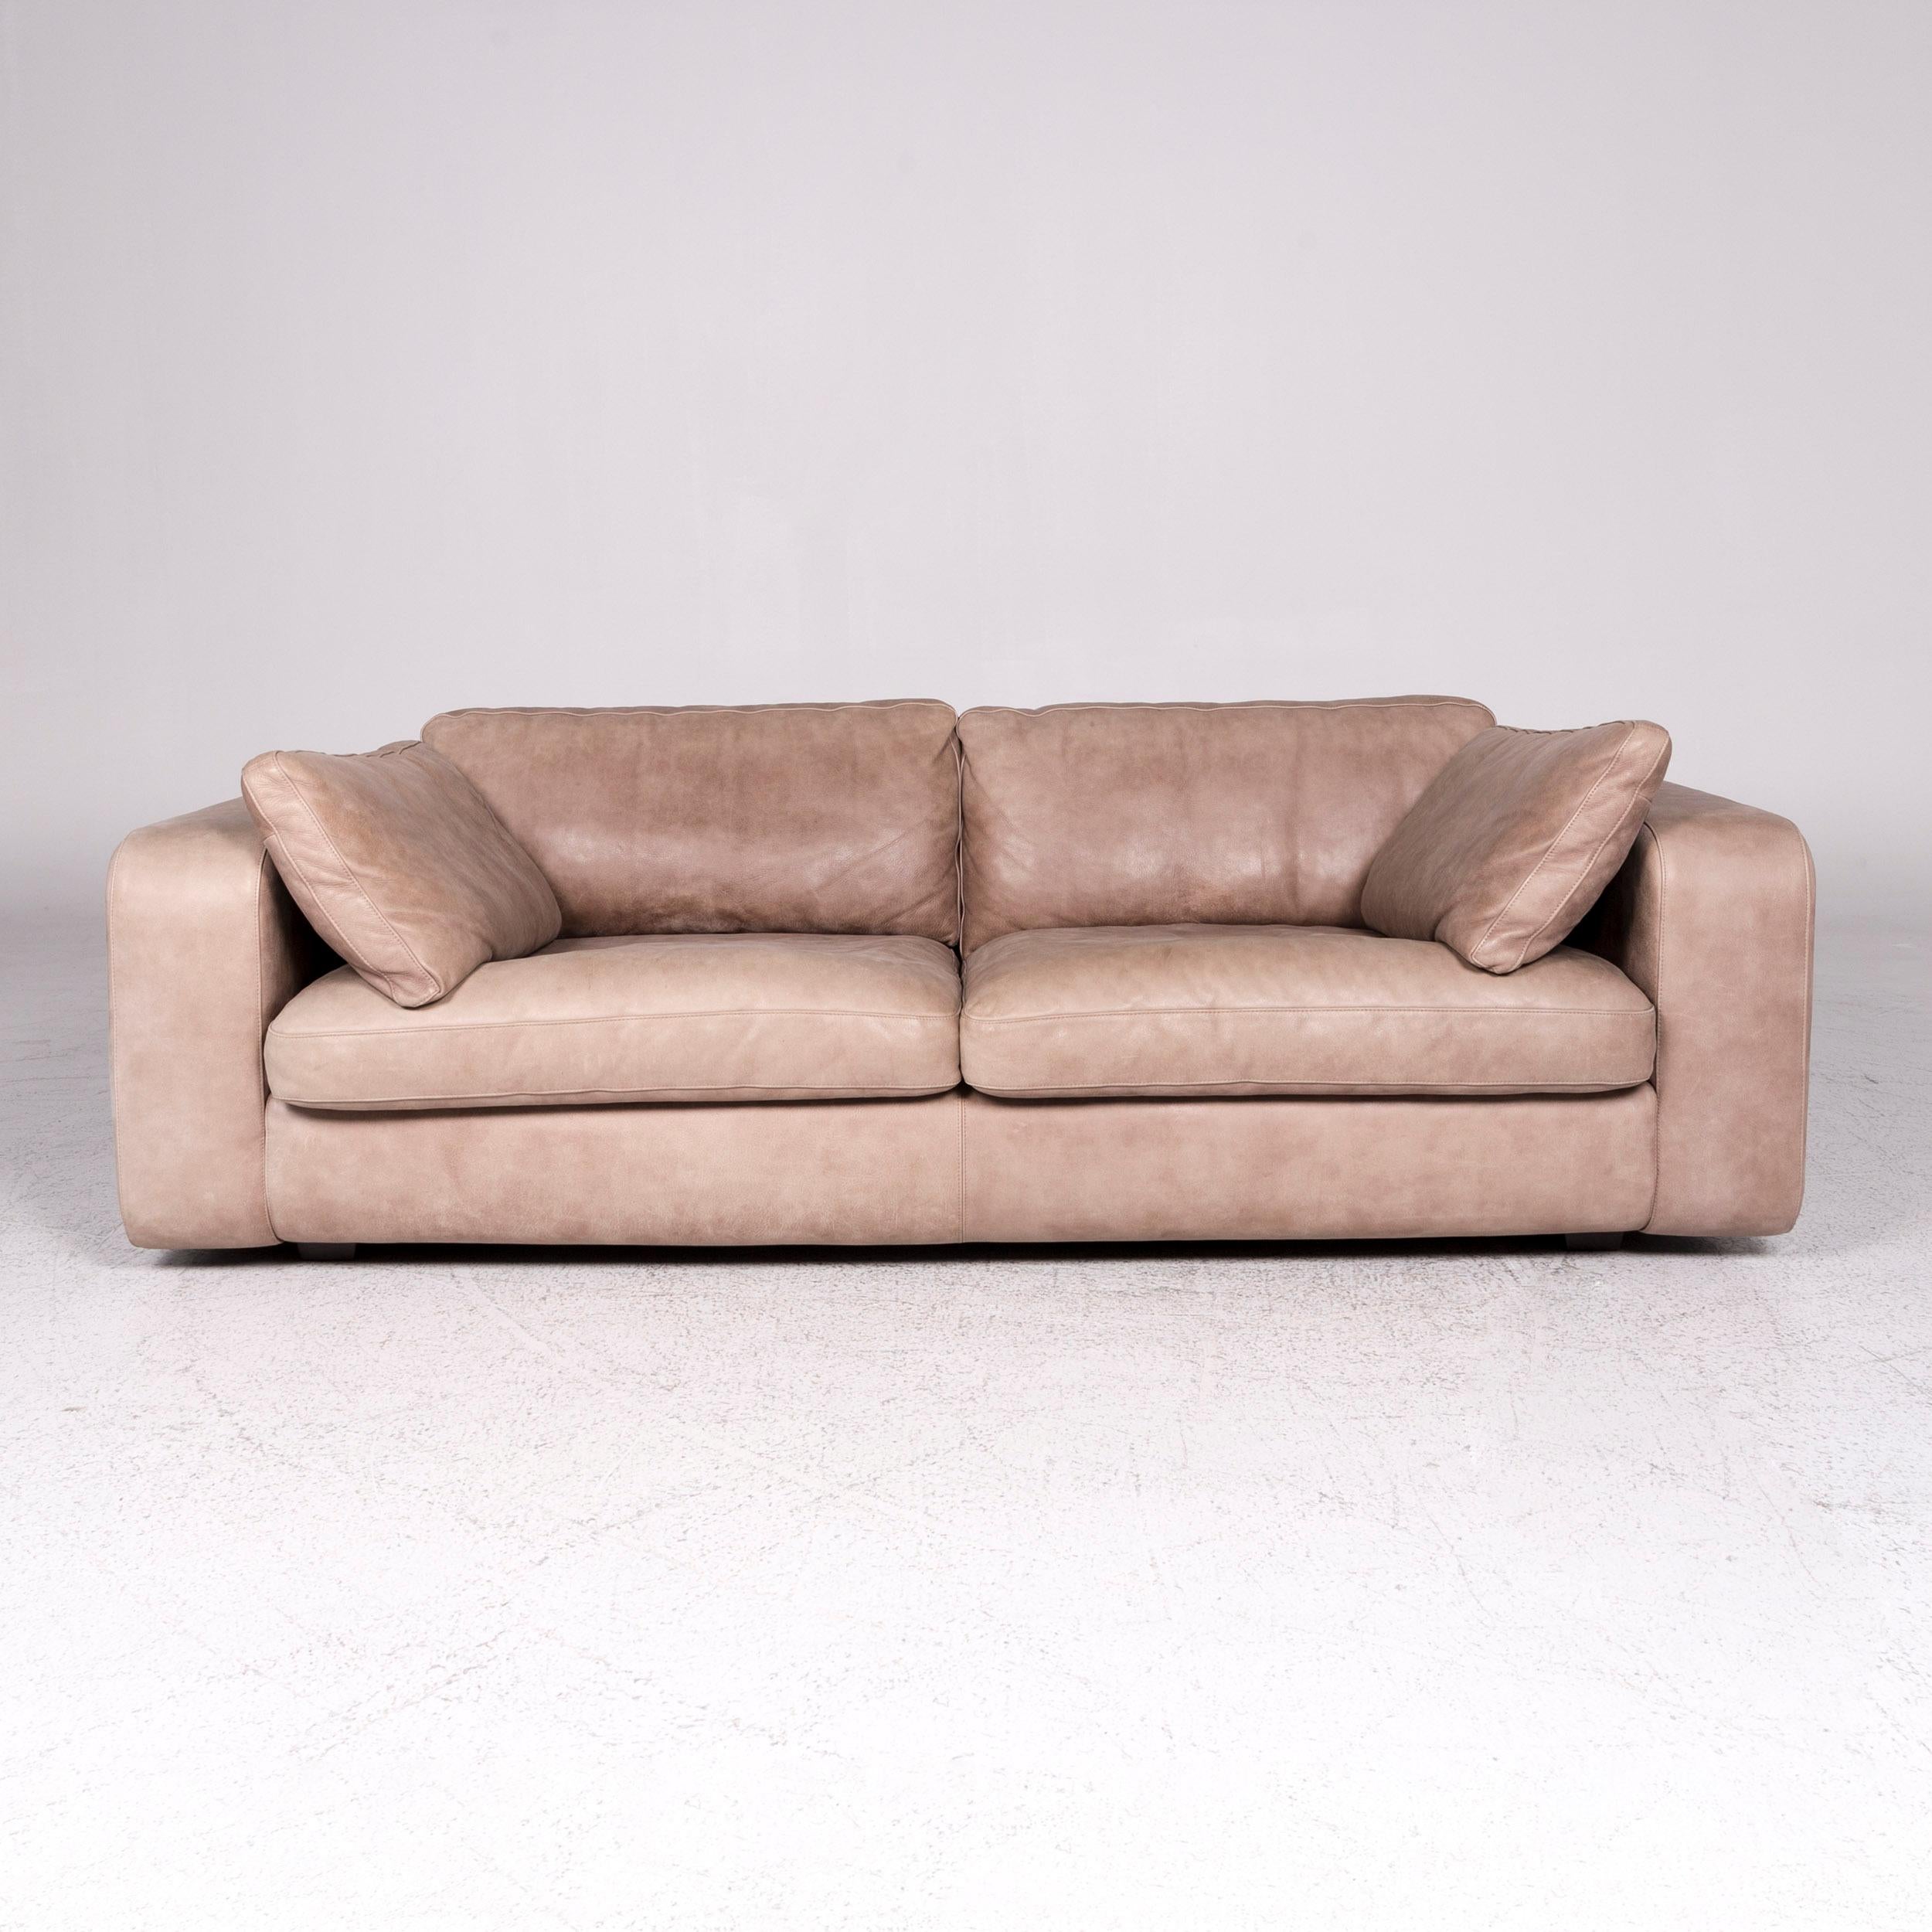 We bring to you a Machalke leather sofa brown beige three-seat couch.

 Product measurements in centimeters:
 
Depth: 114
Width: 223
Height: 72
Seat-height: 45
Rest-height: 61
Seat-depth: 74
Seat-width: 139
Back-height: 35.

 